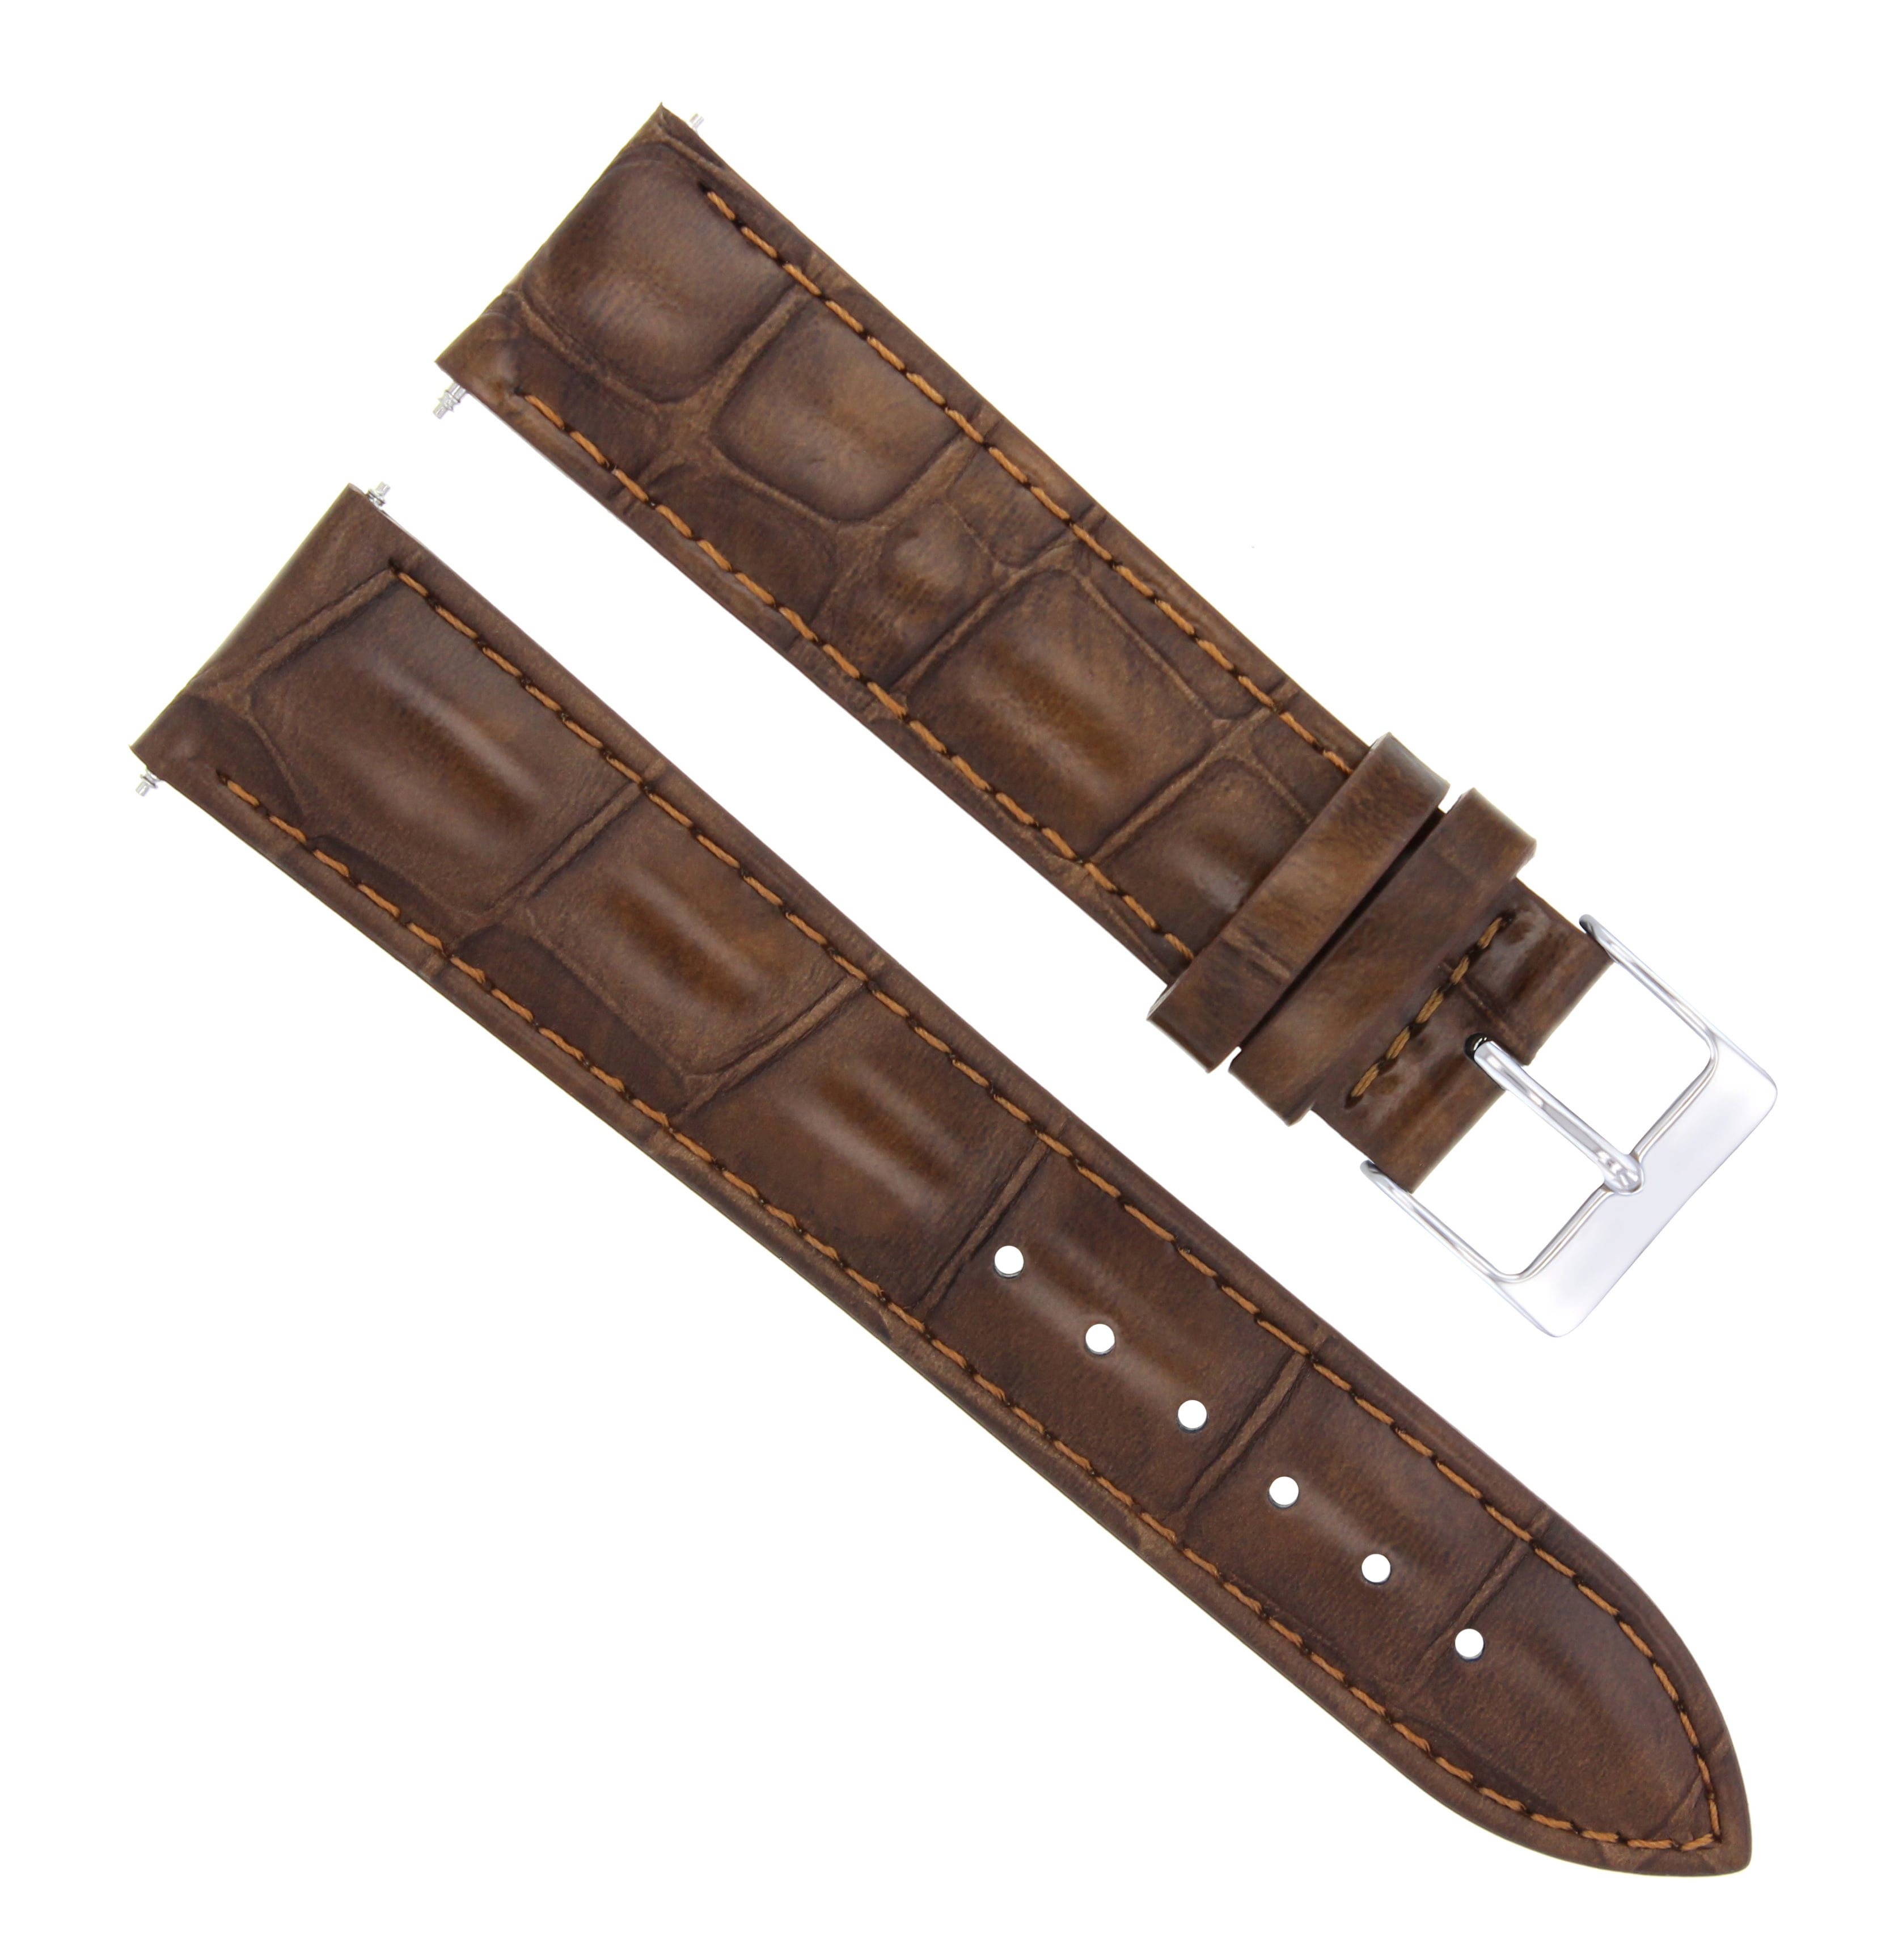 18MM GENUINE LEATHER STRAP BAND FOR SEIKO 5 AUTOMATIC DIVER SKX007 LIGHT  BROWN 